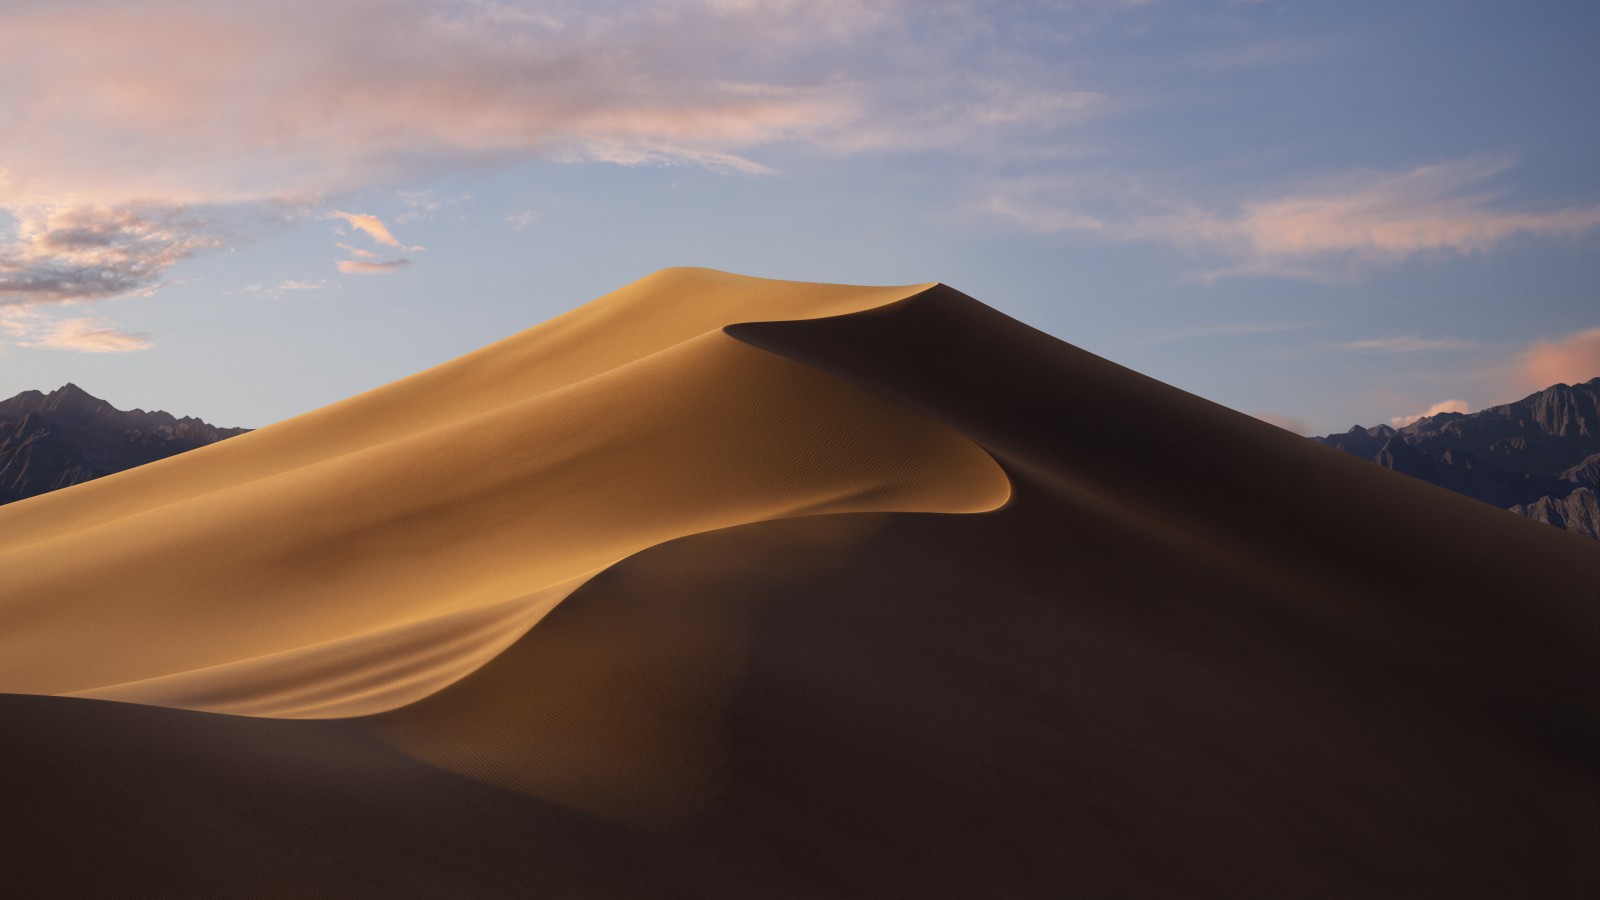 Where to download macos mojave